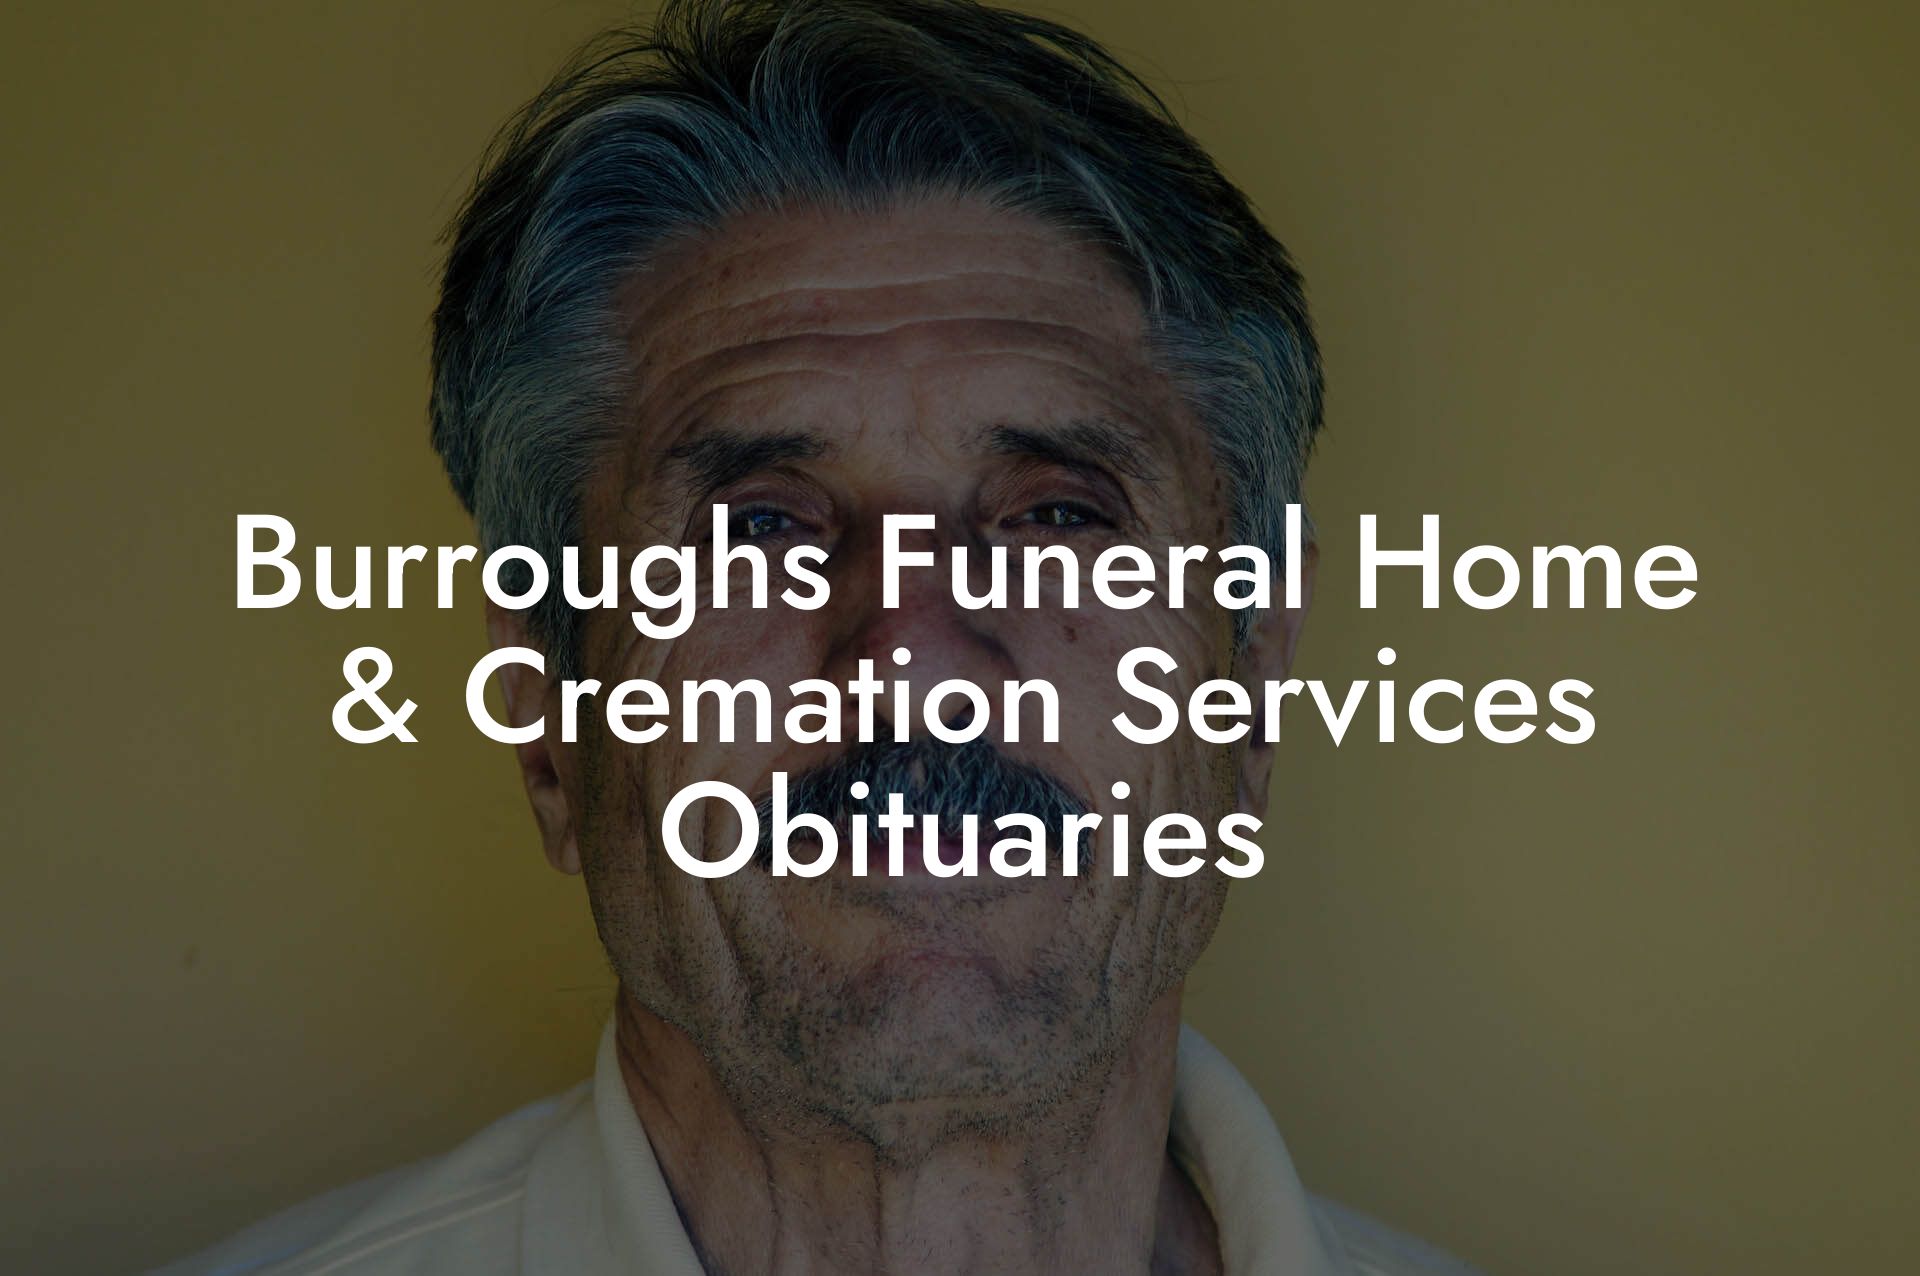 Burroughs Funeral Home & Cremation Services Obituaries